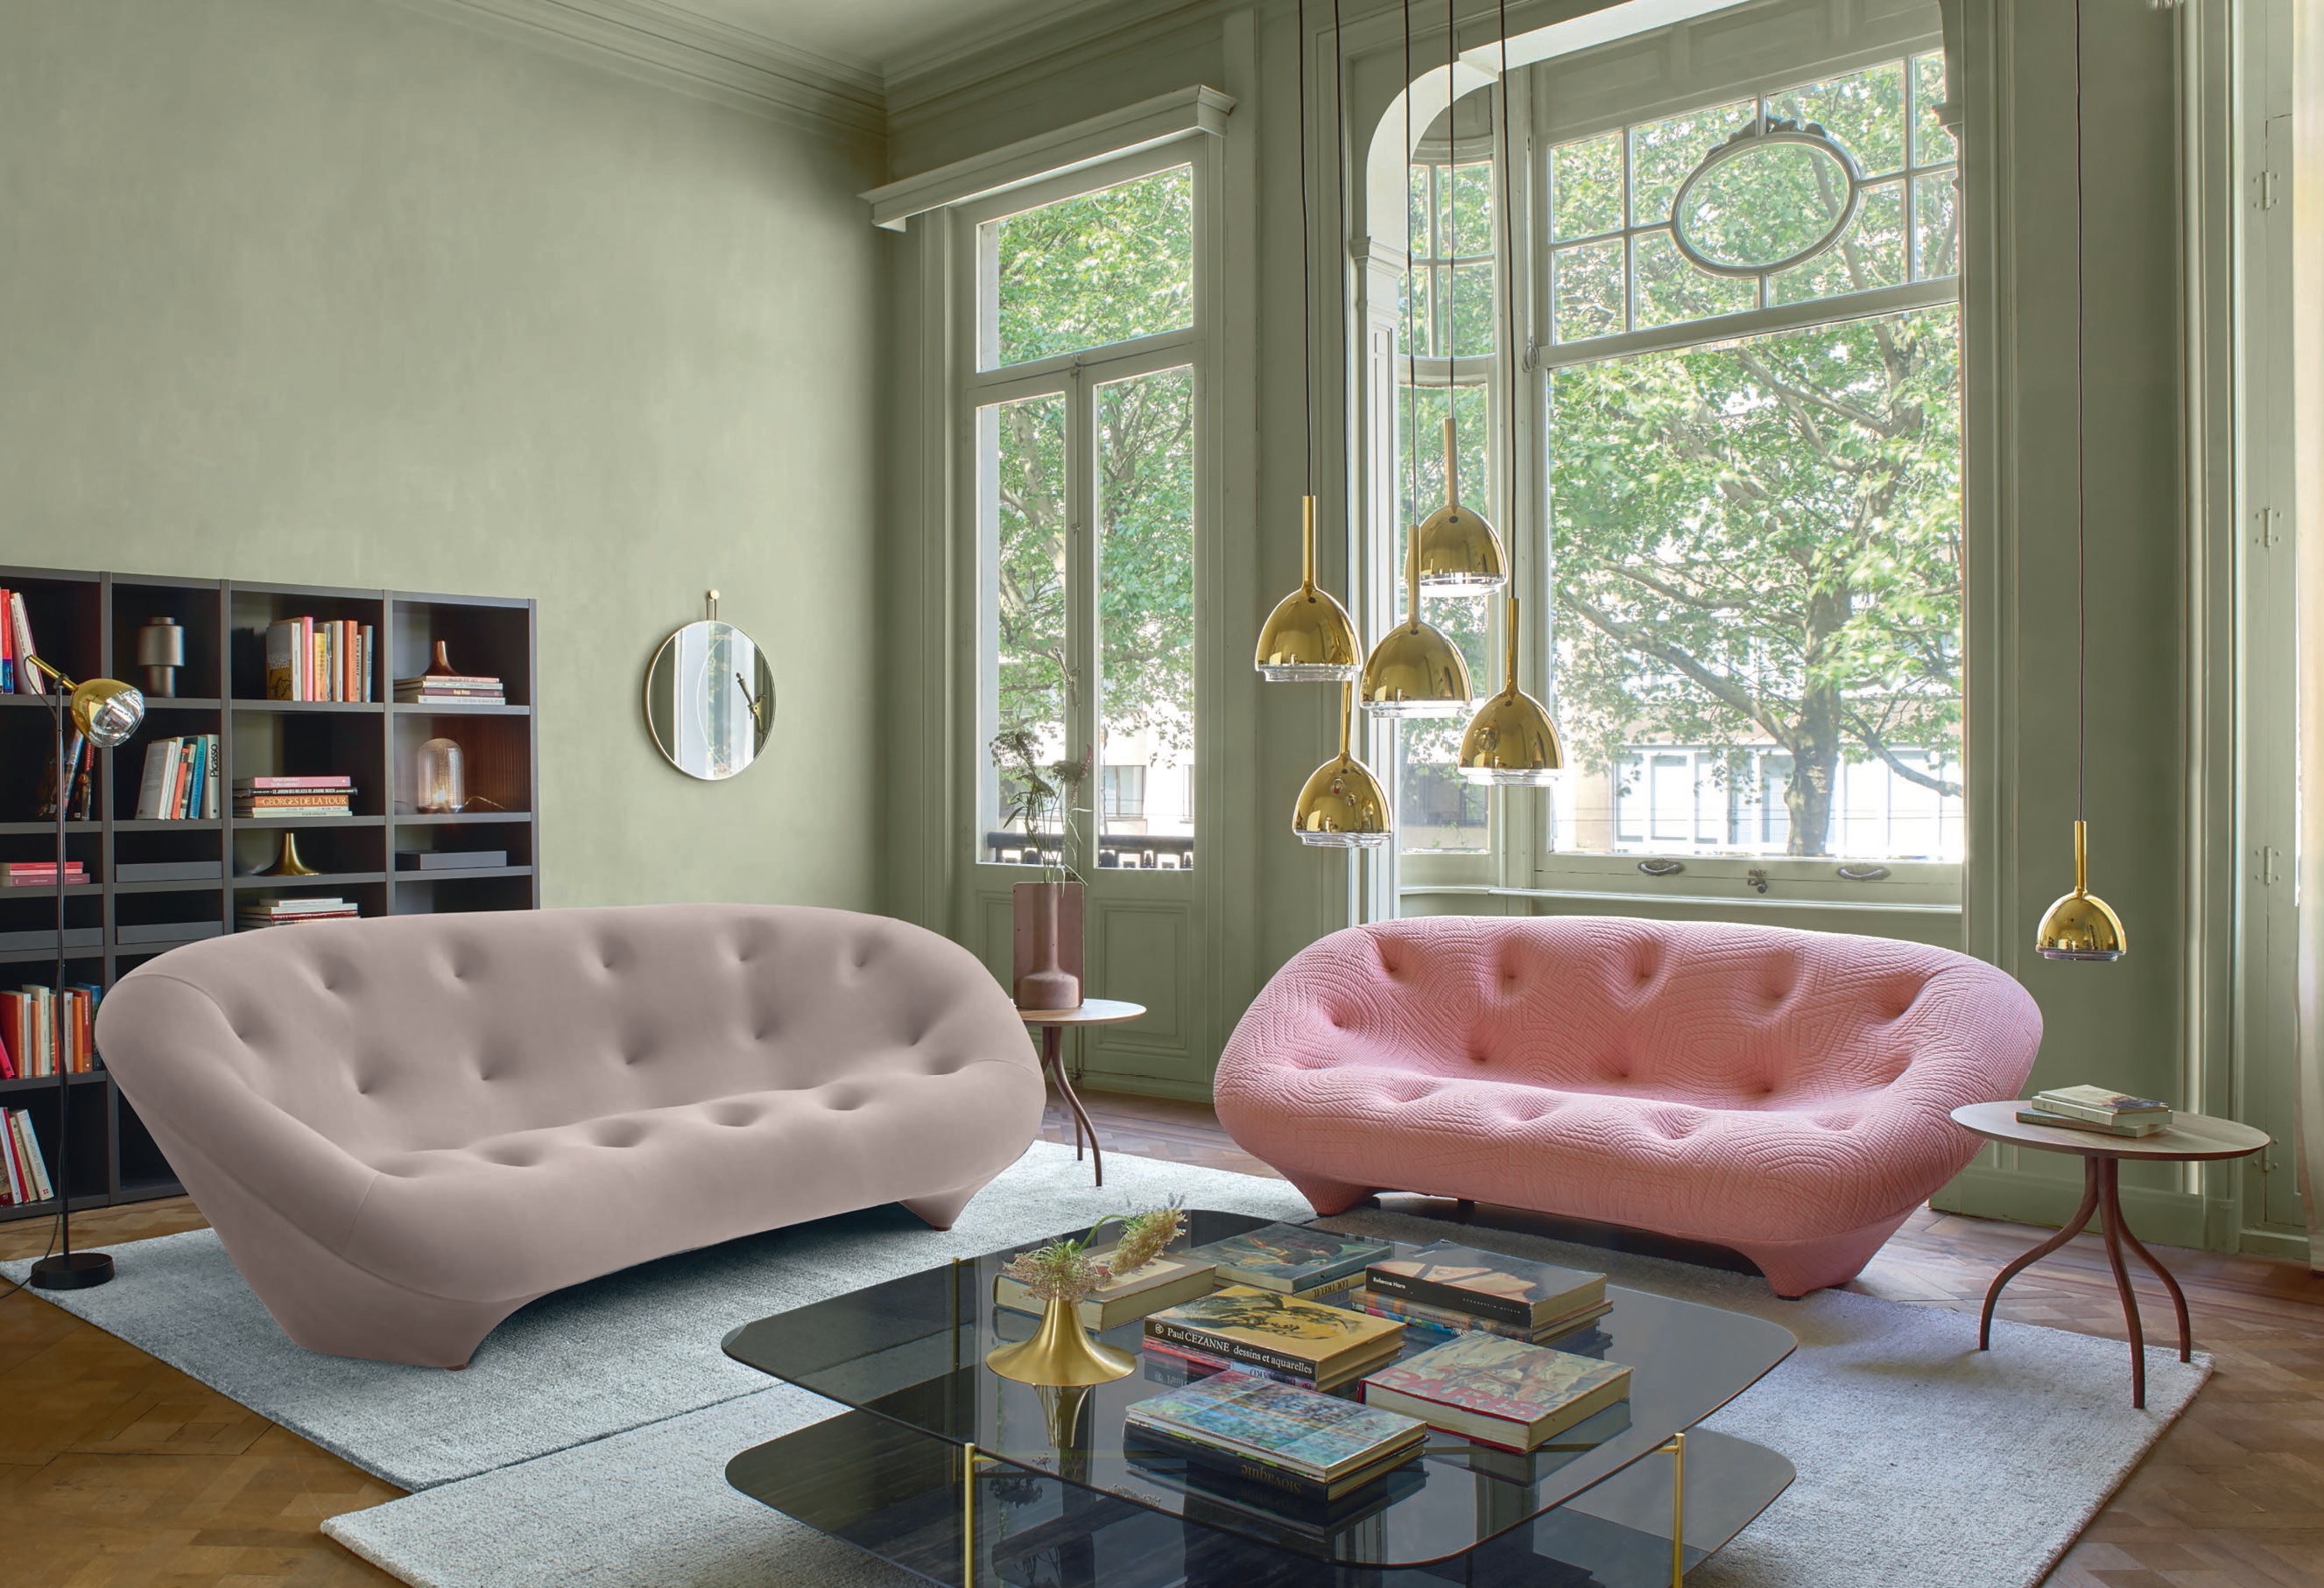 Ploum sofas by Erwan and Ronan Bouroullec for Ligne Roset PHOTO COURTESY OF BRAND